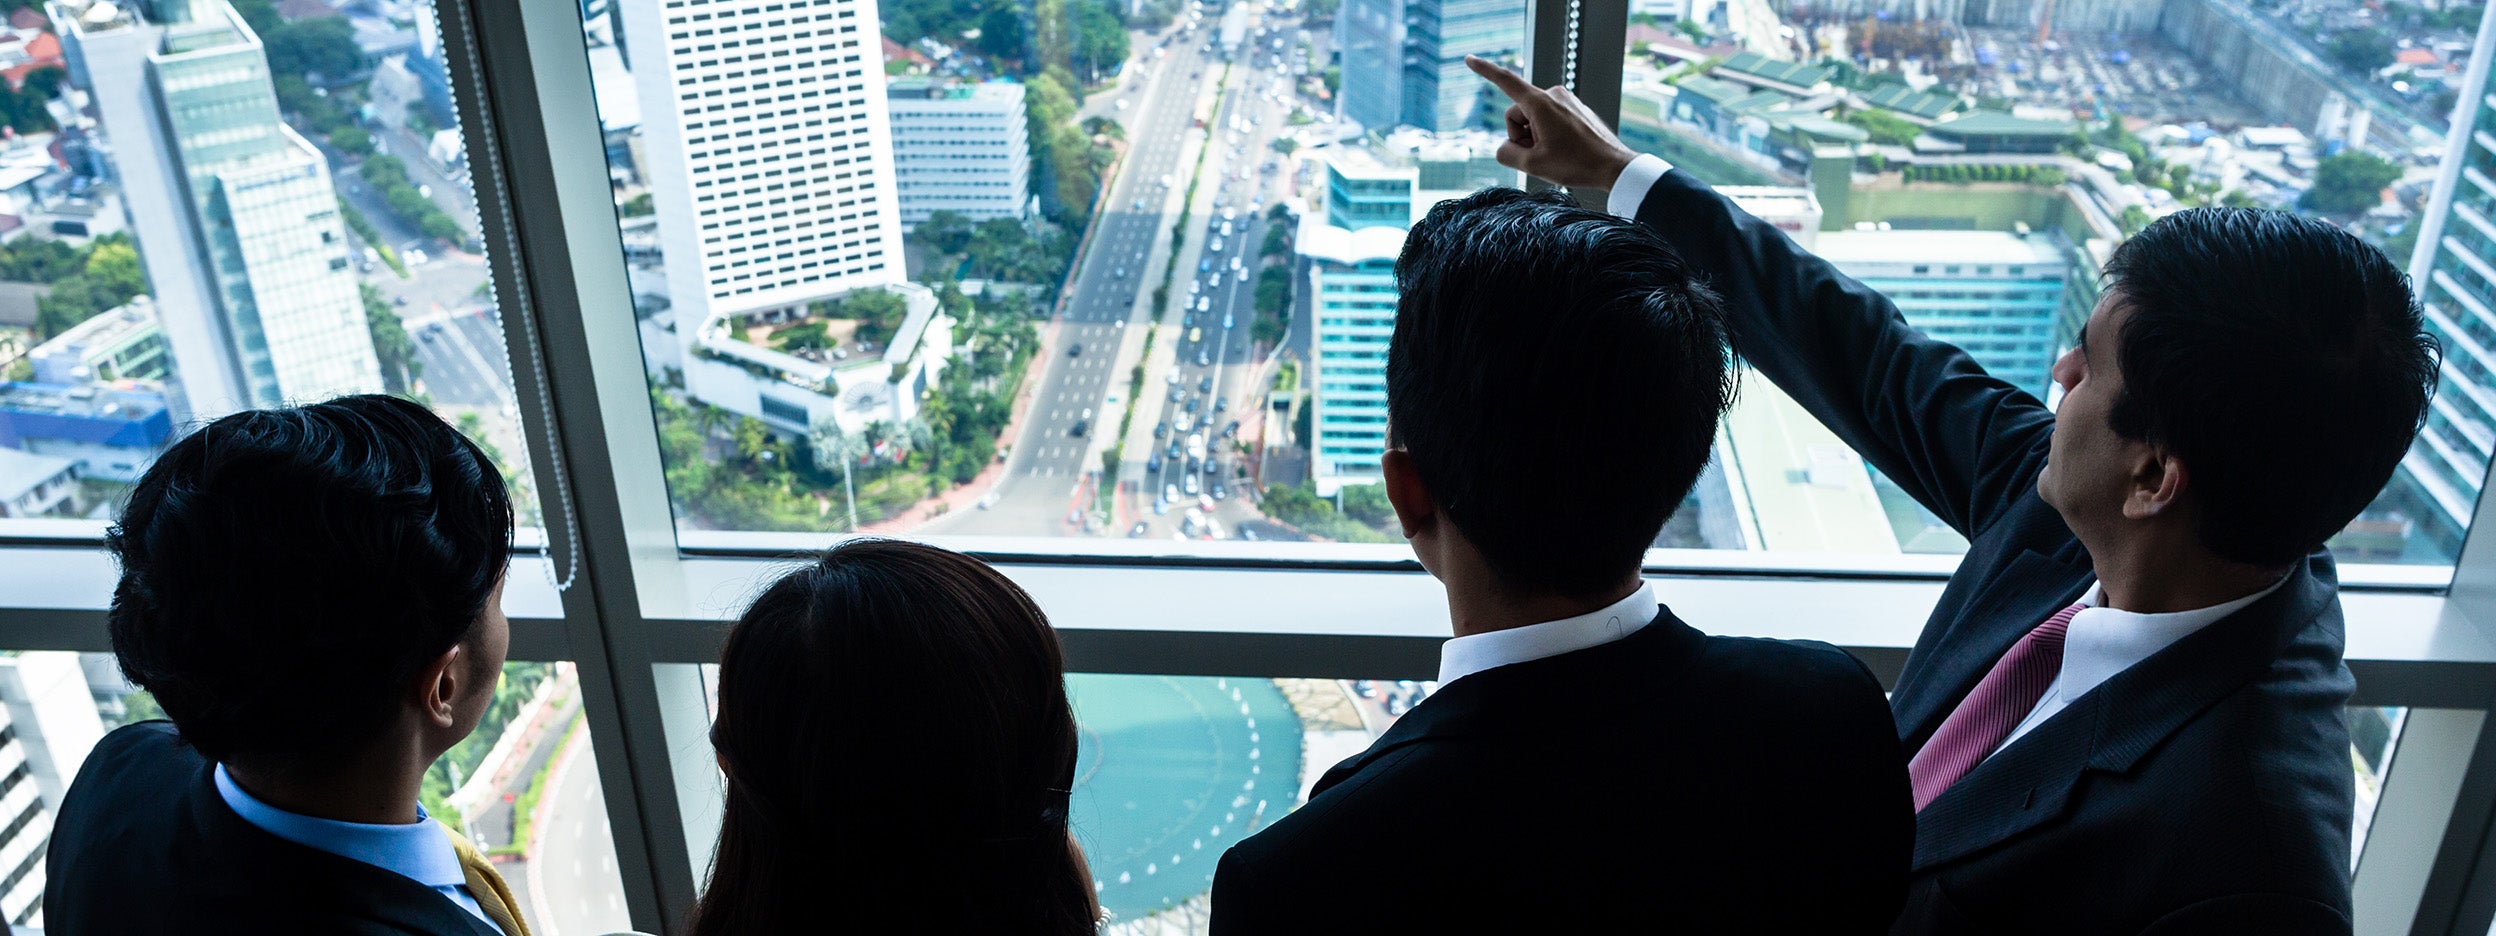 Group of Asian businesspeople looking at city skyline